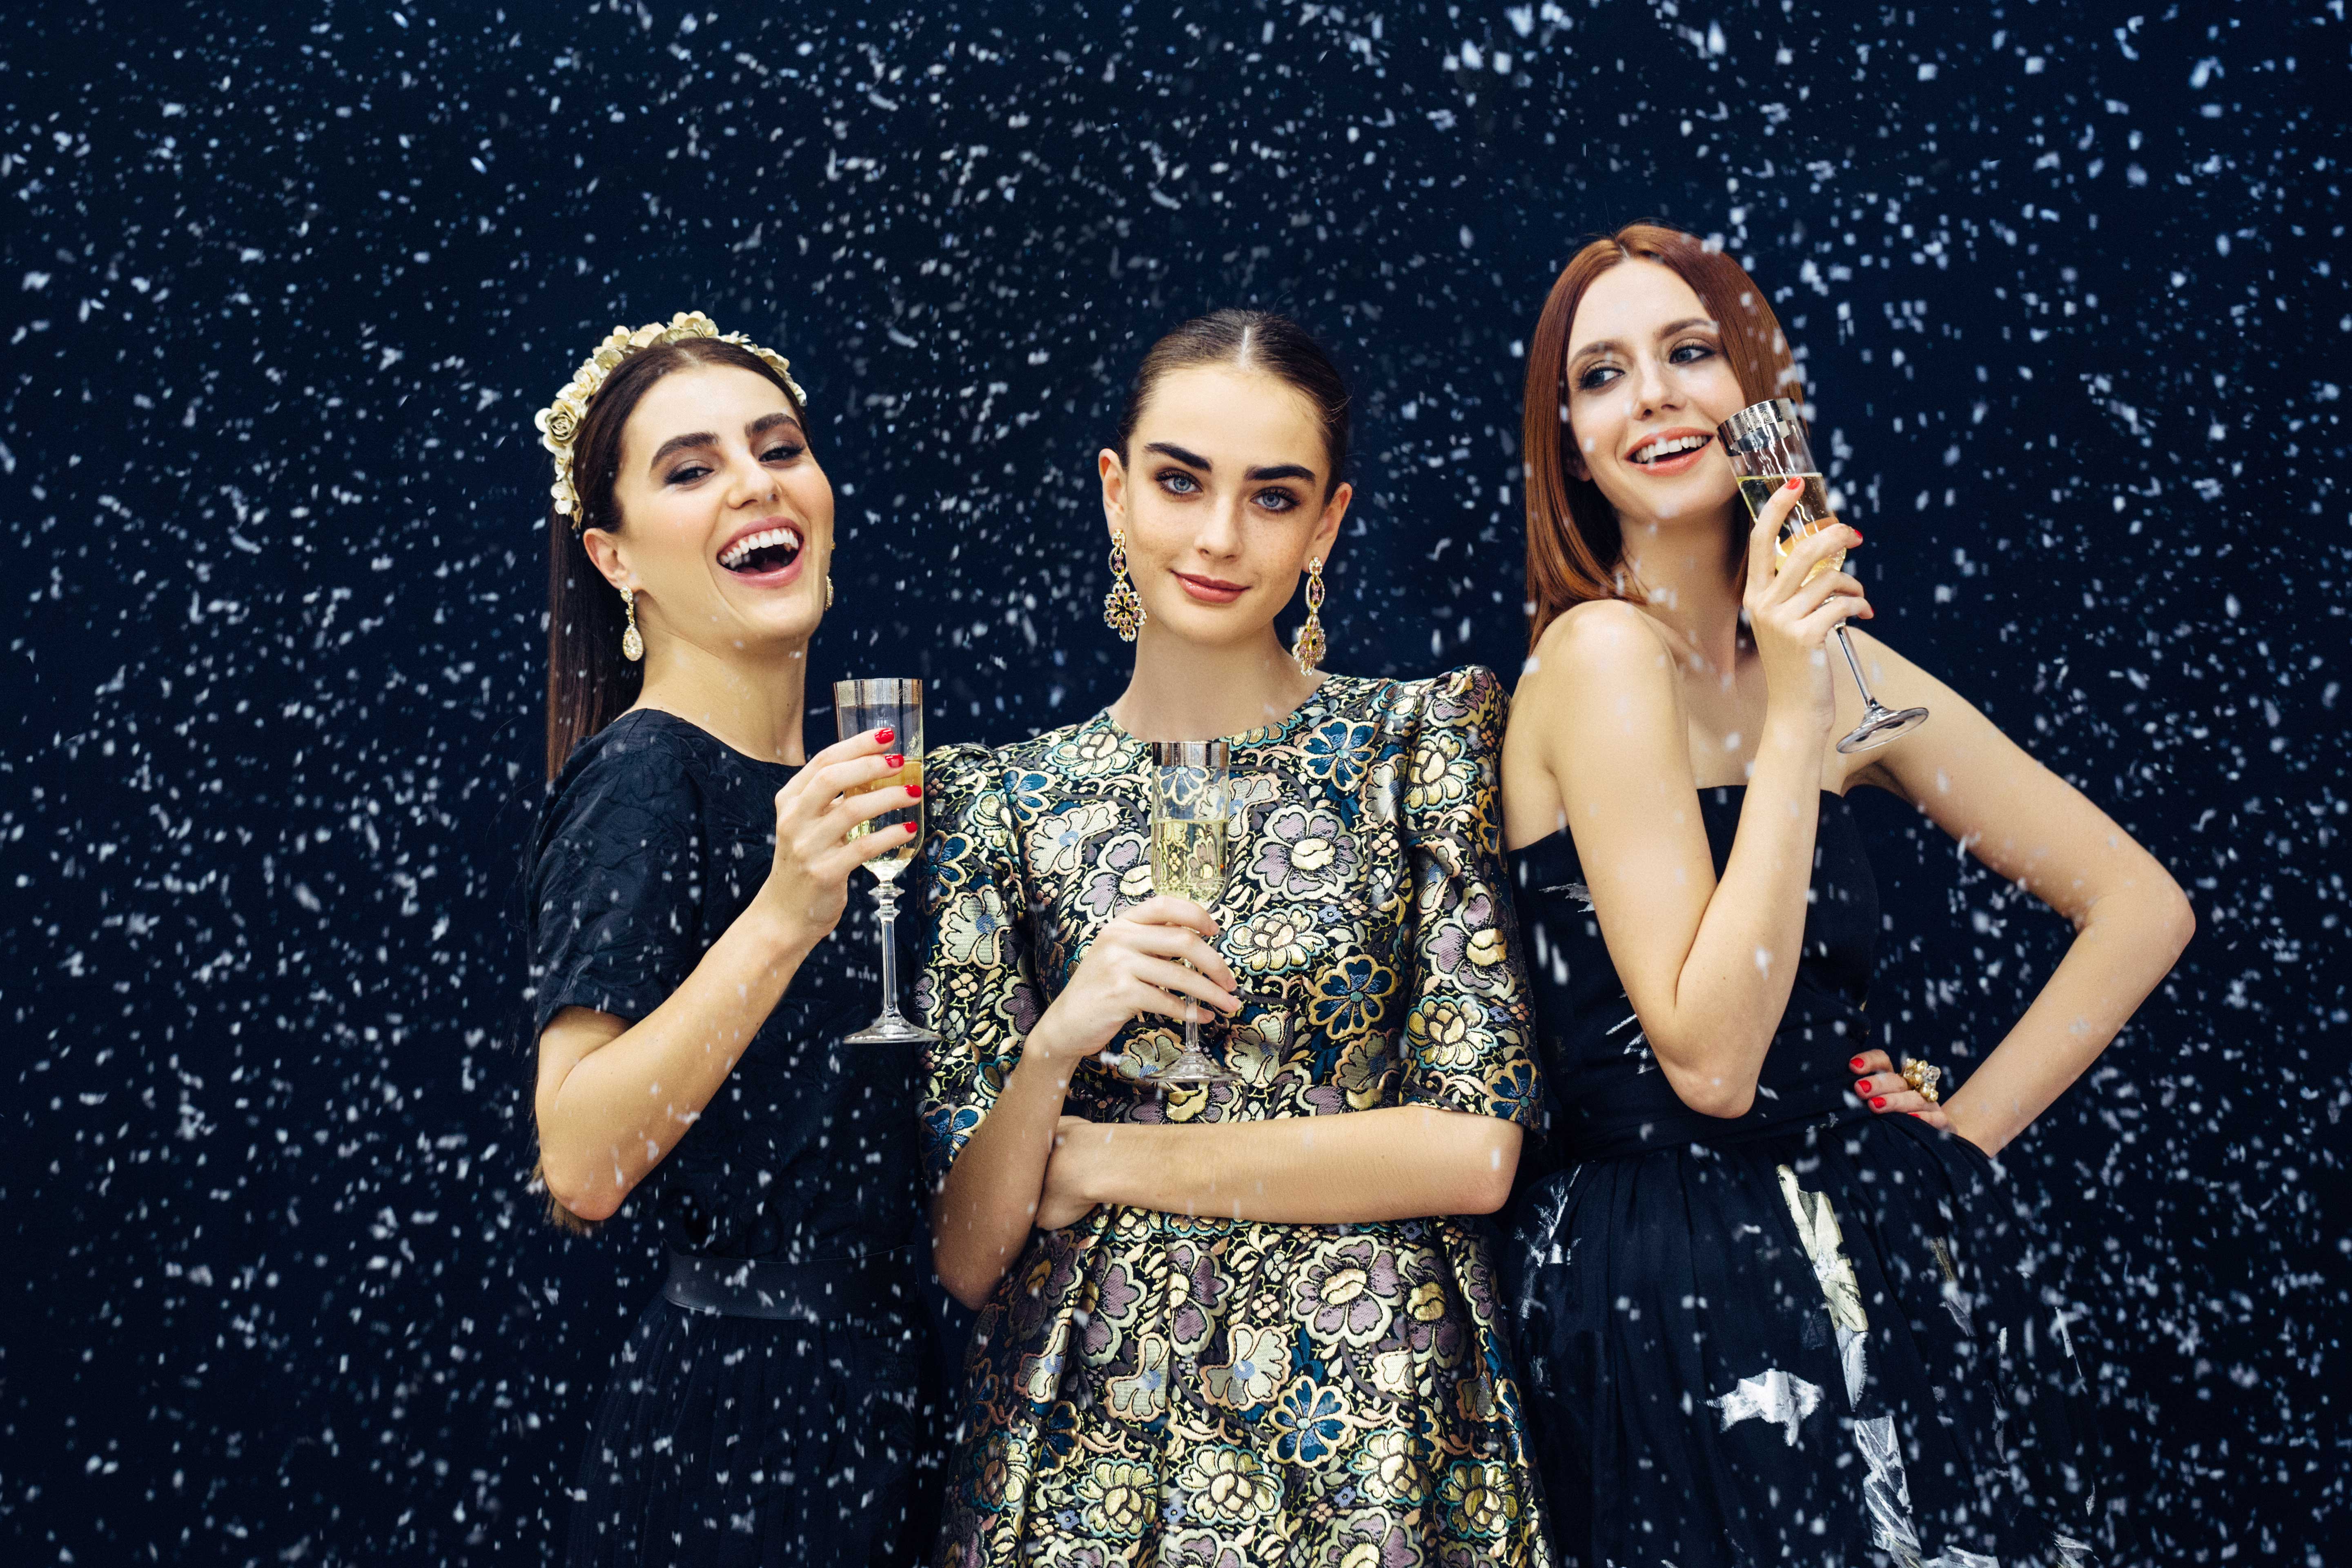 Three women posing for a photo booth photo at a New Year's Eve event with fake now falling